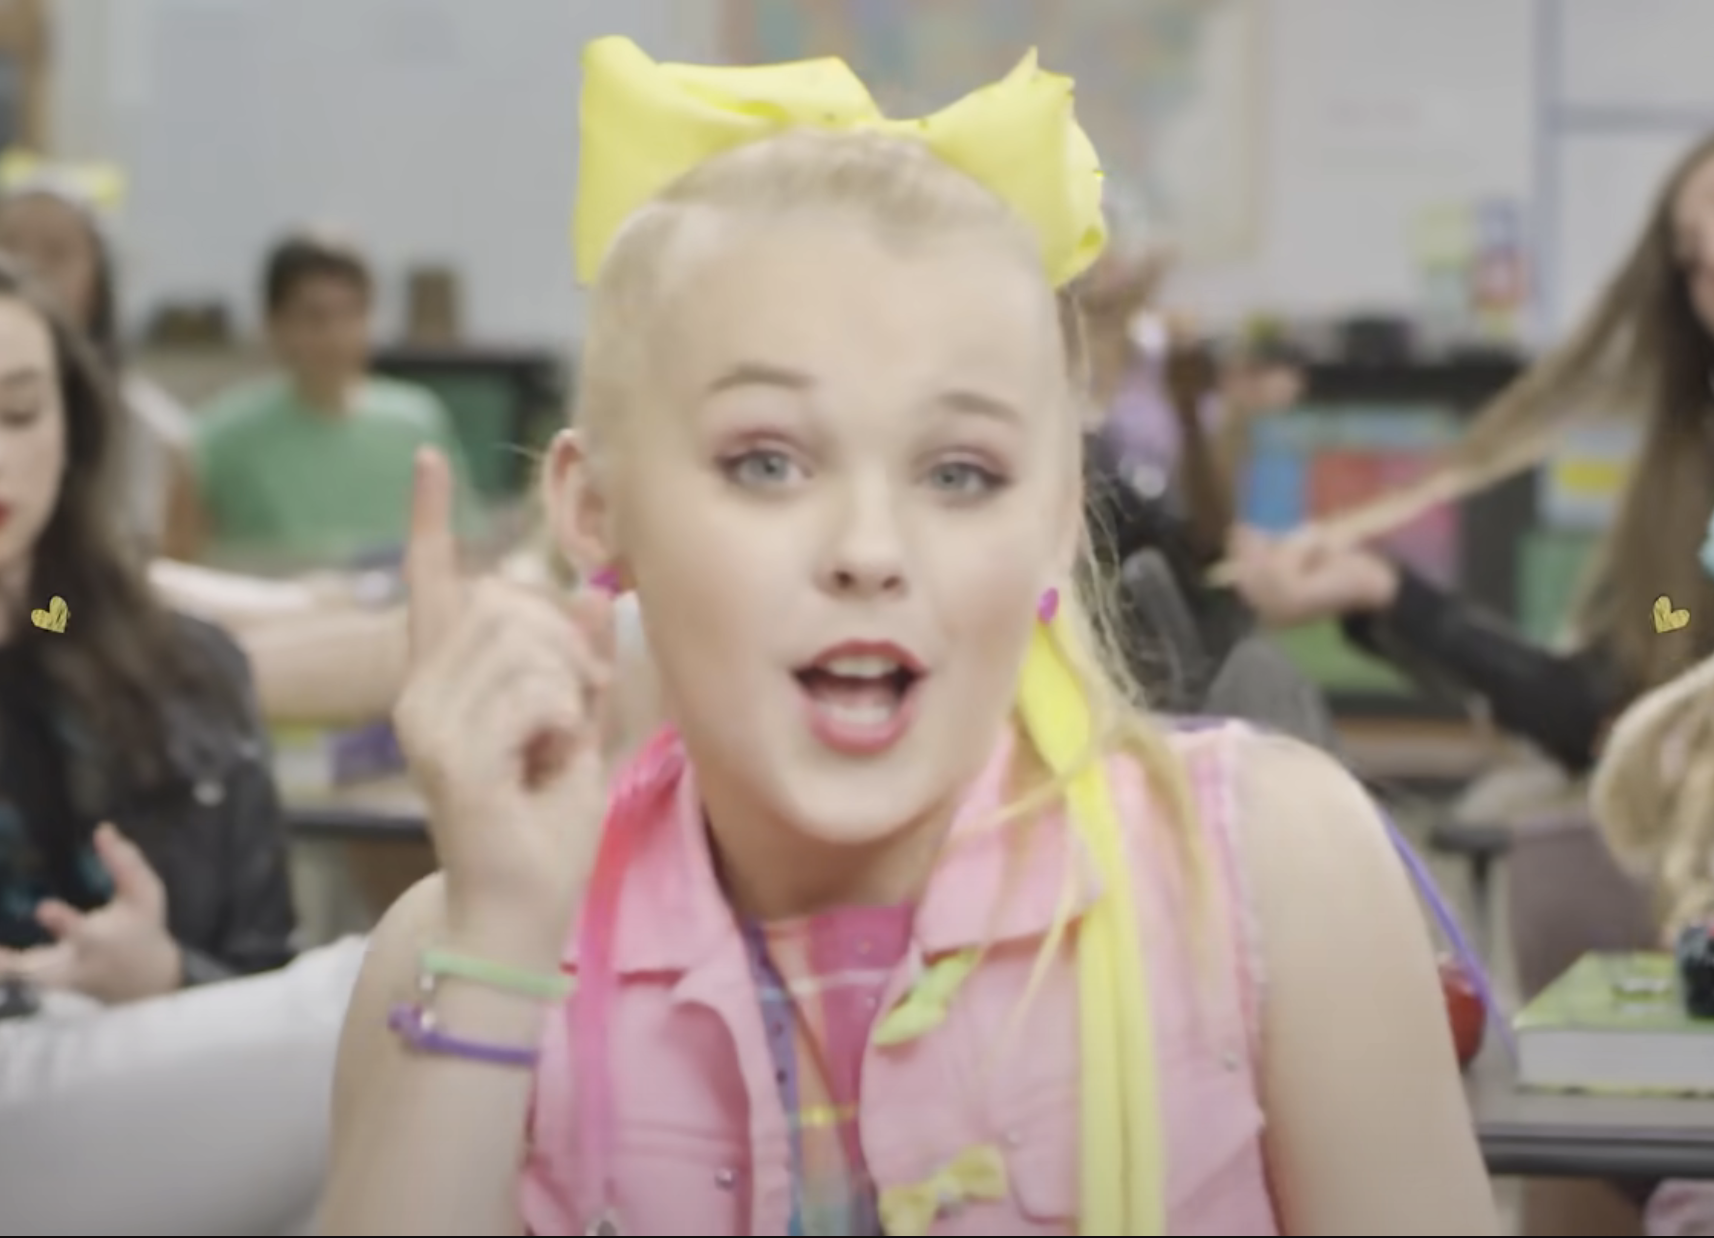 JoJo Siwa in a classroom setting, wearing a signature bow, gesturing with her finger raised